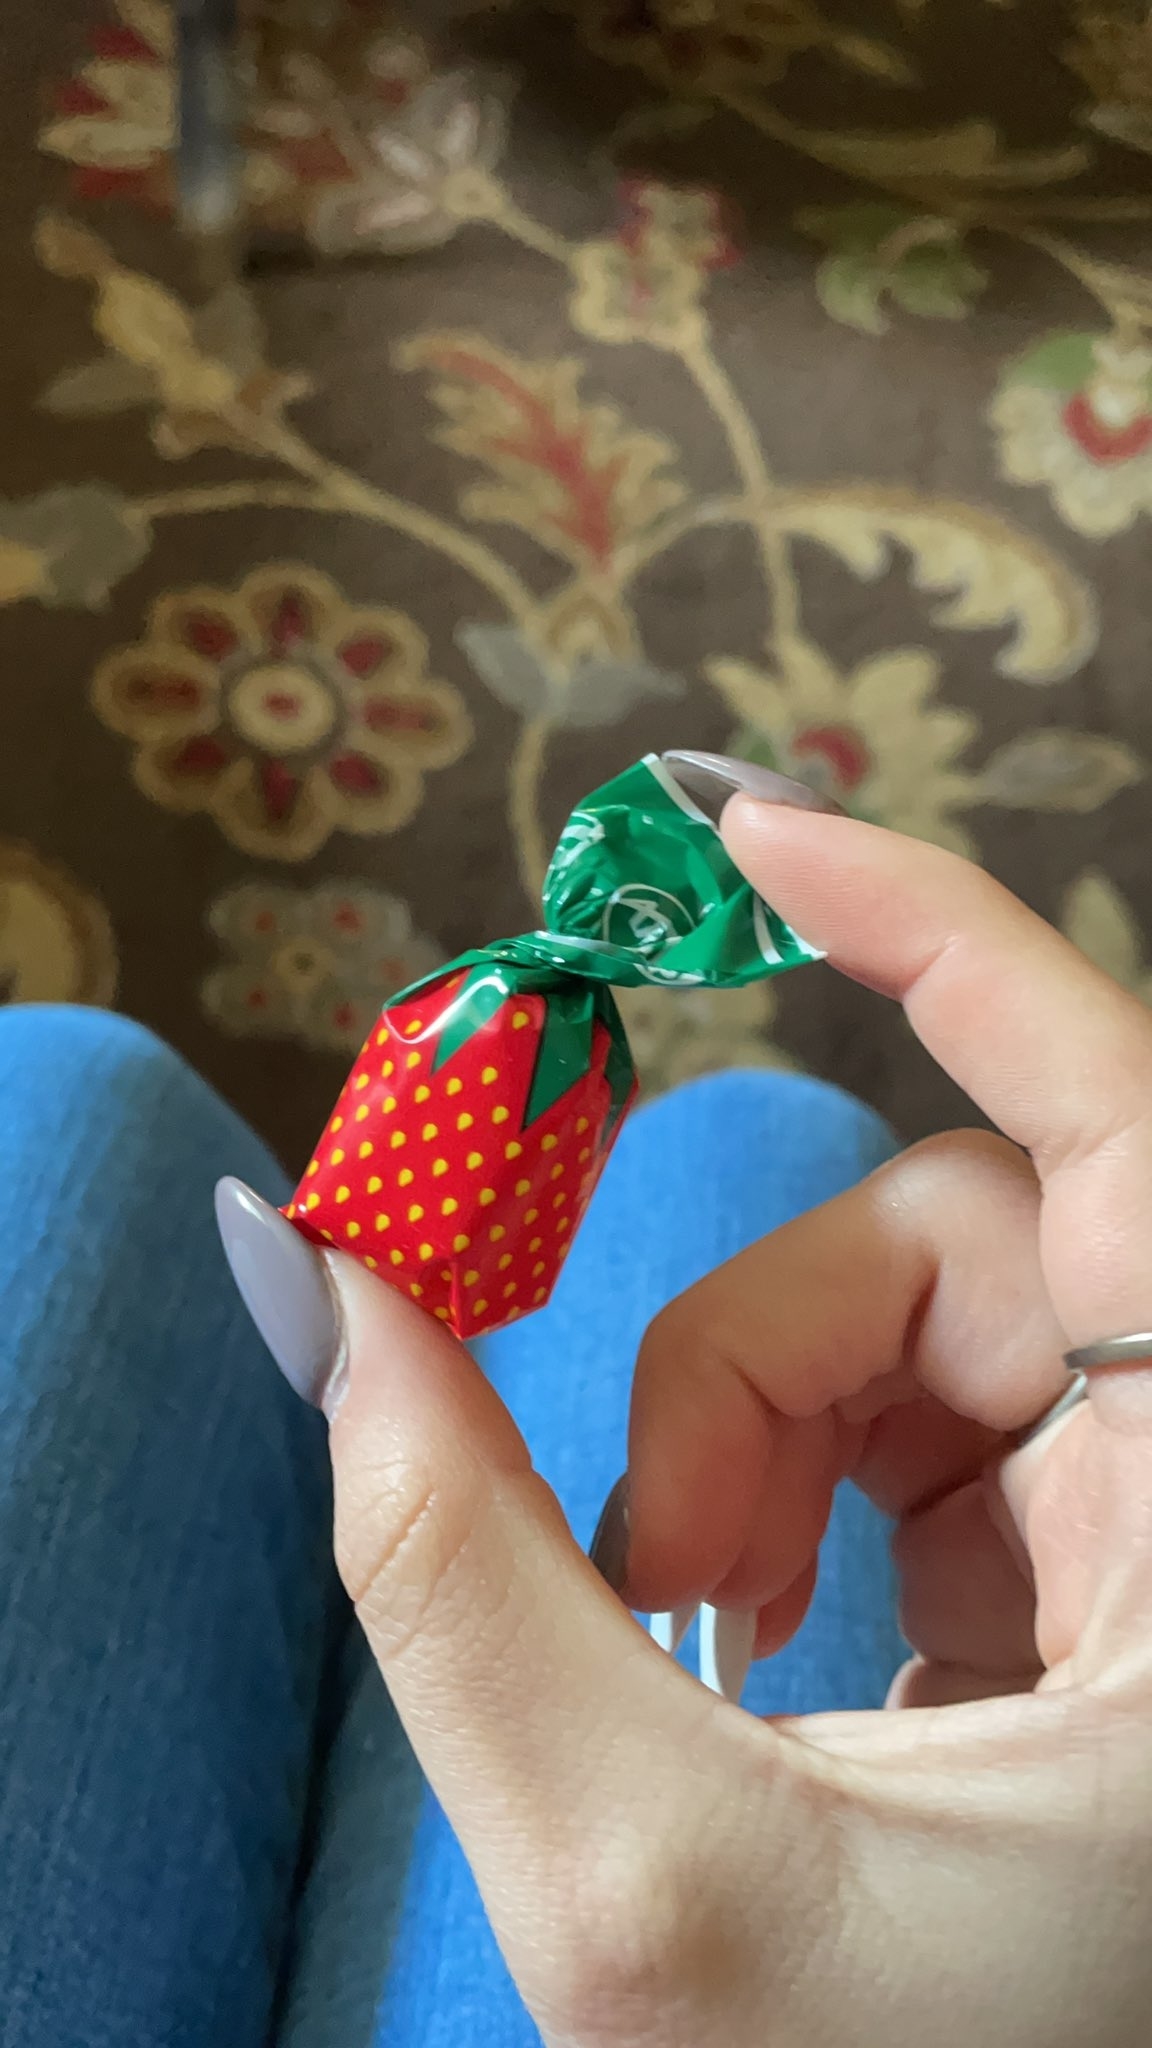 A candy with a strawberry-colored wrapper